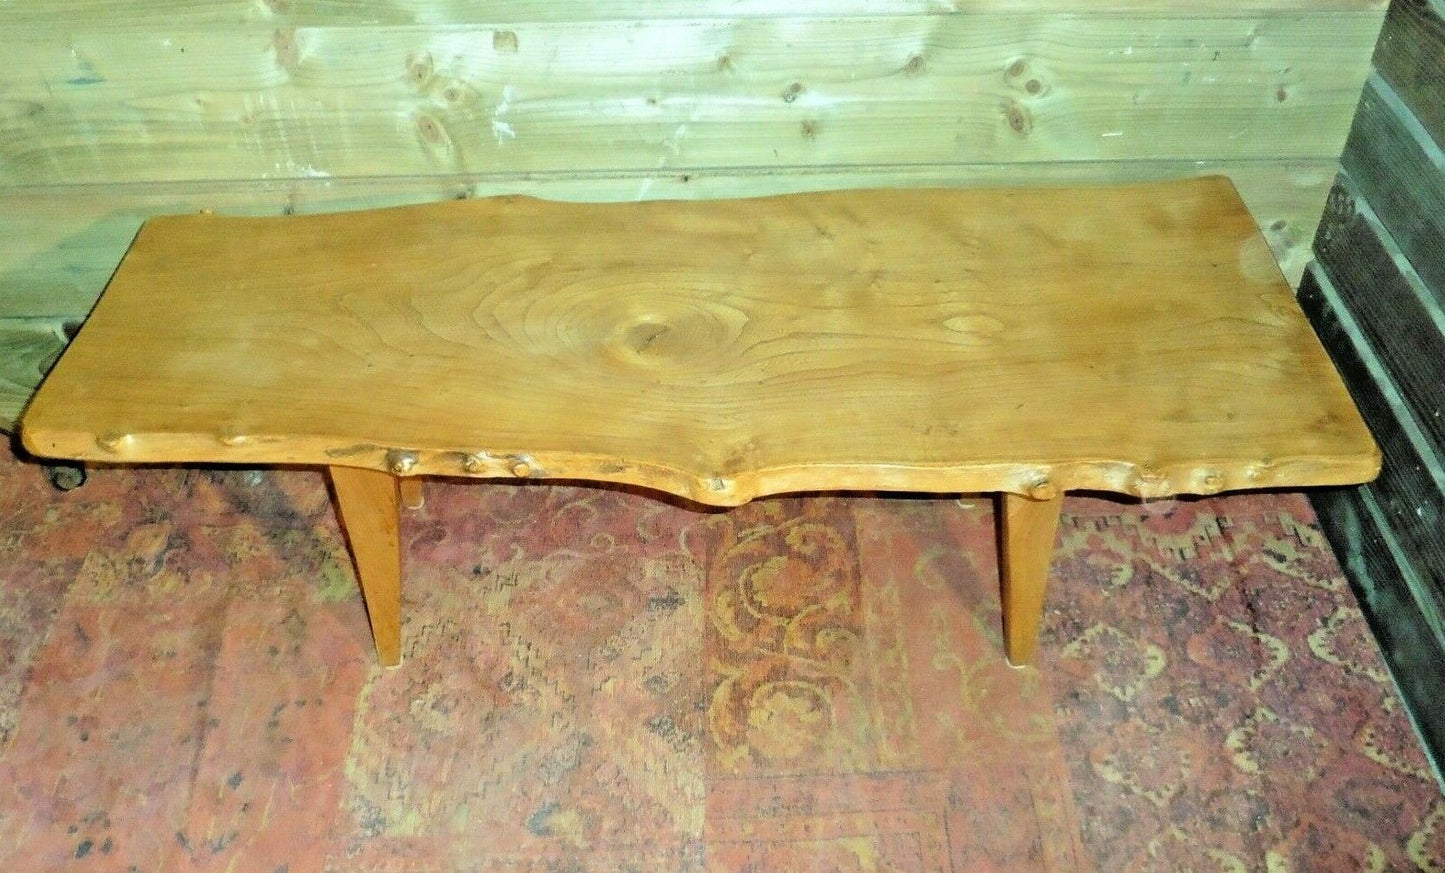 418.....Vintage Rustic Coffee Table / Solid Ash Coffee Table ( SOLD )